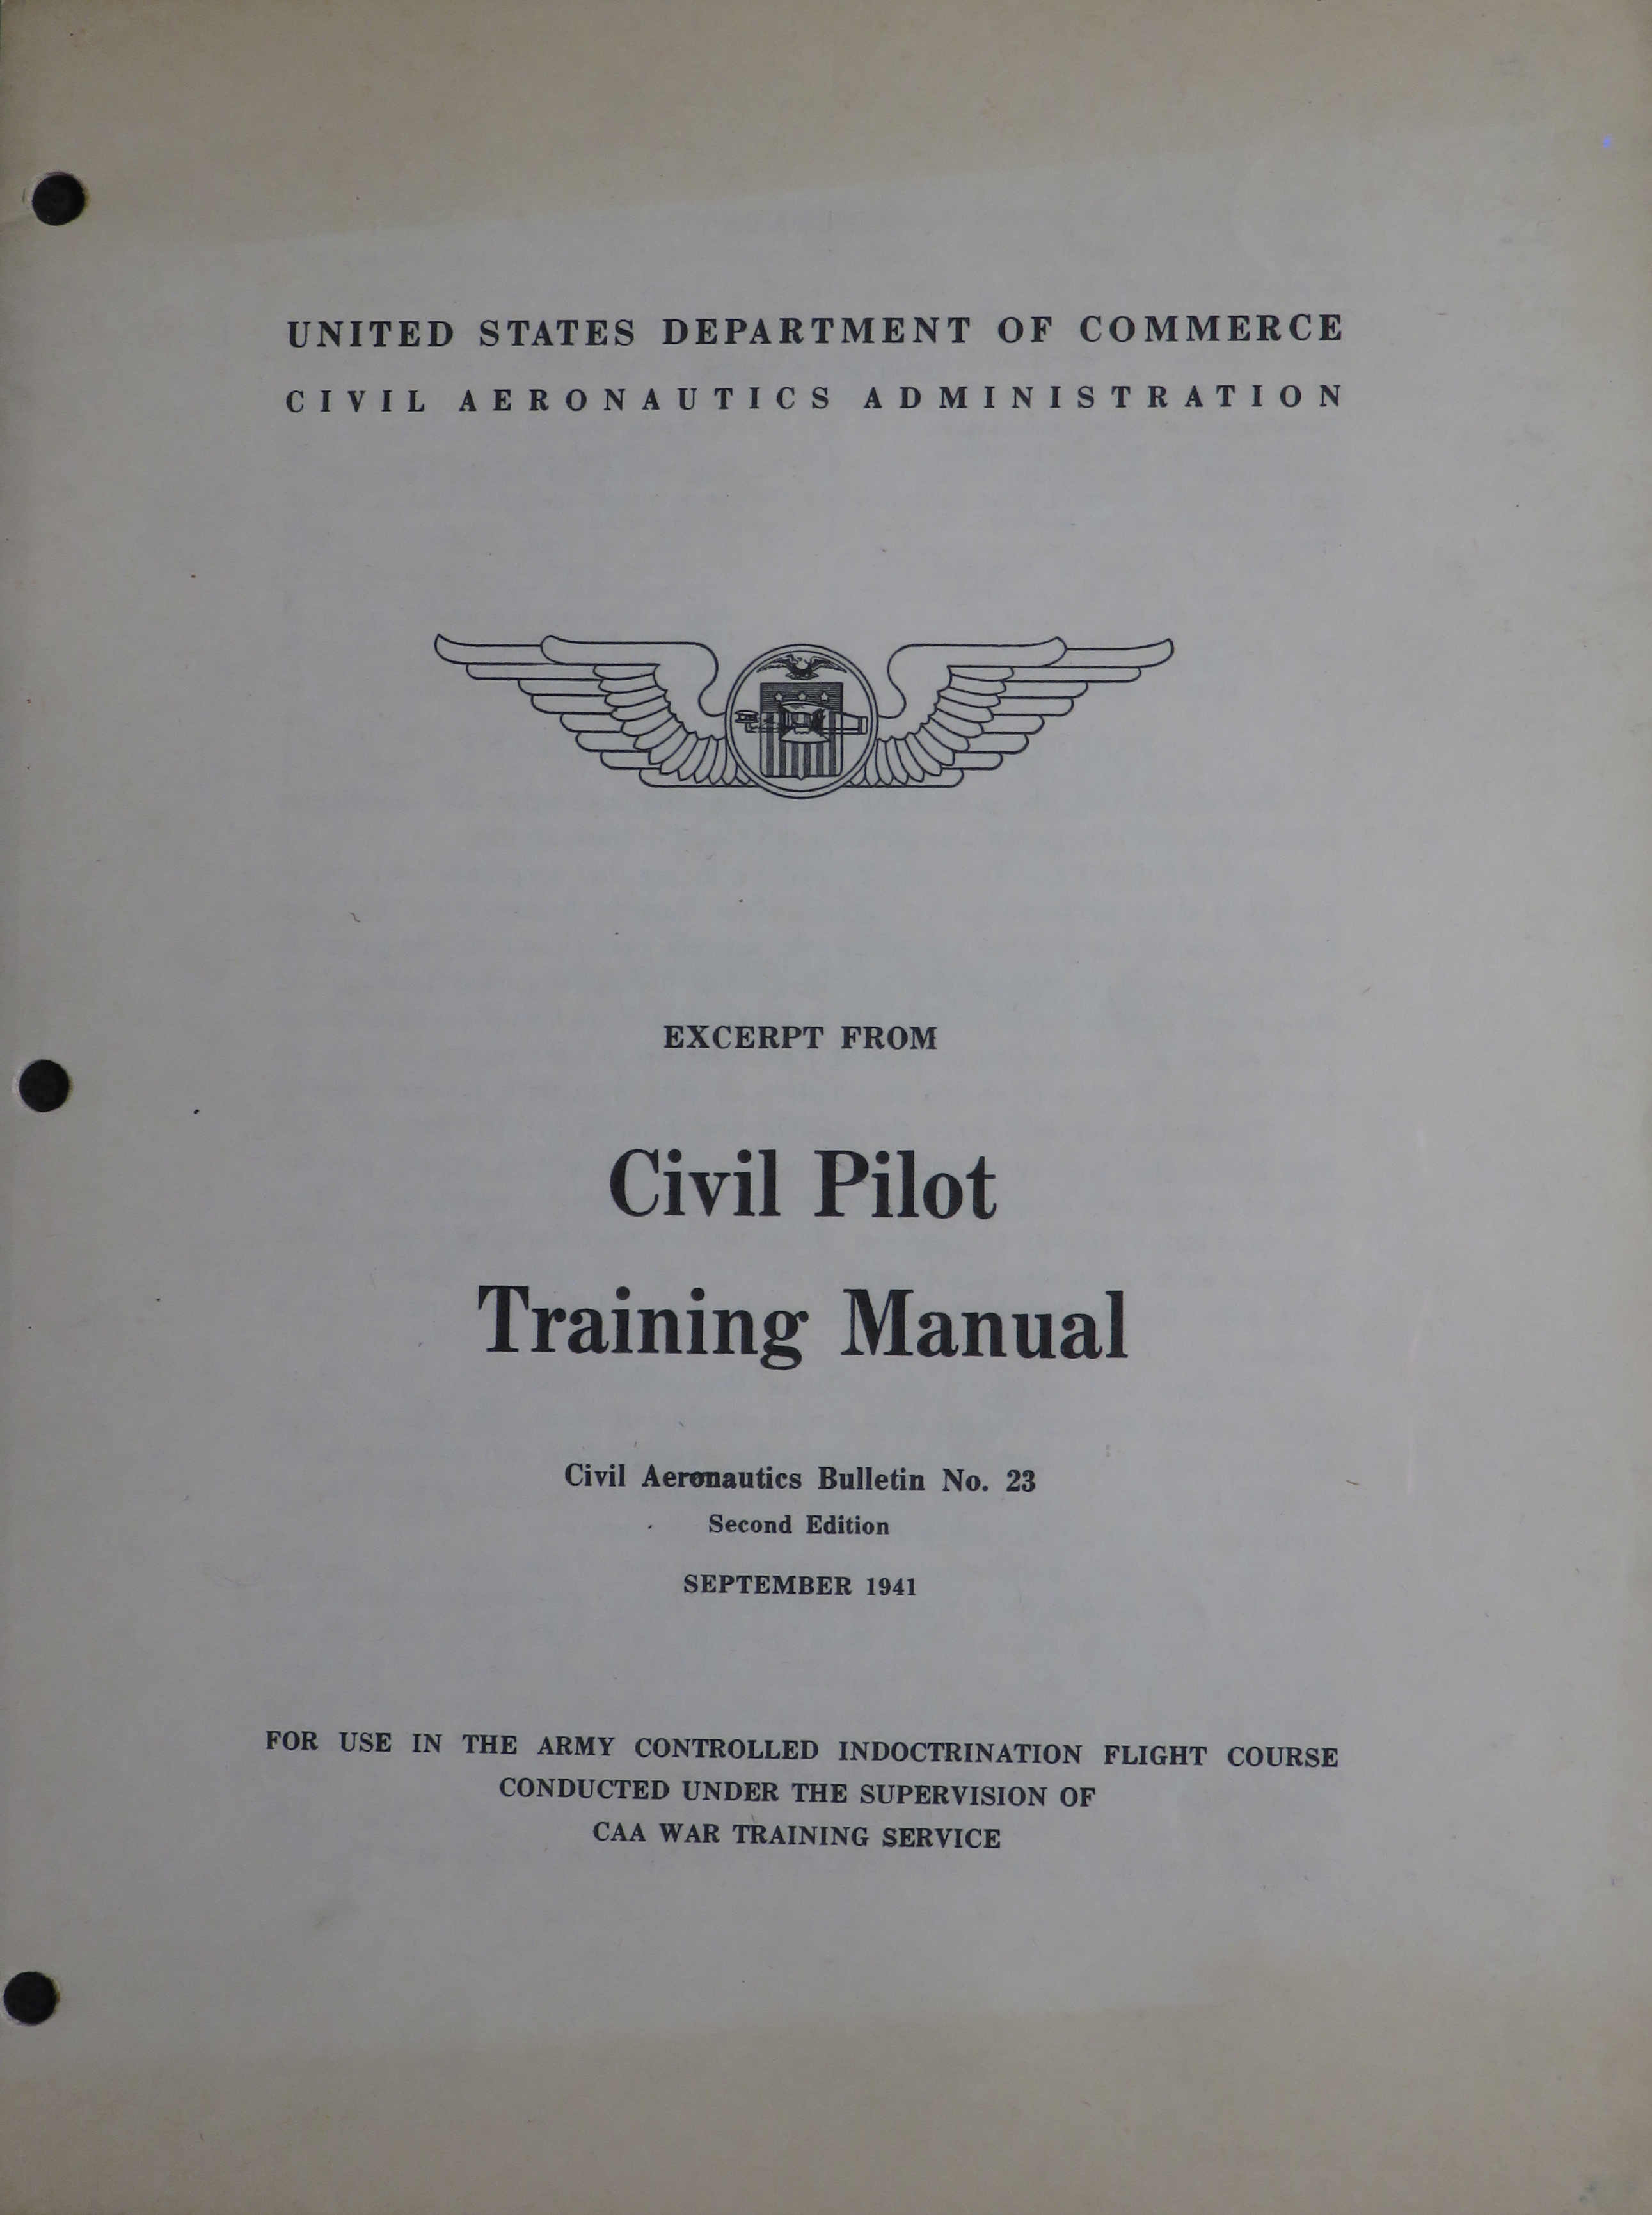 Sample page 1 from AirCorps Library document: Civil Pilot Training Manual